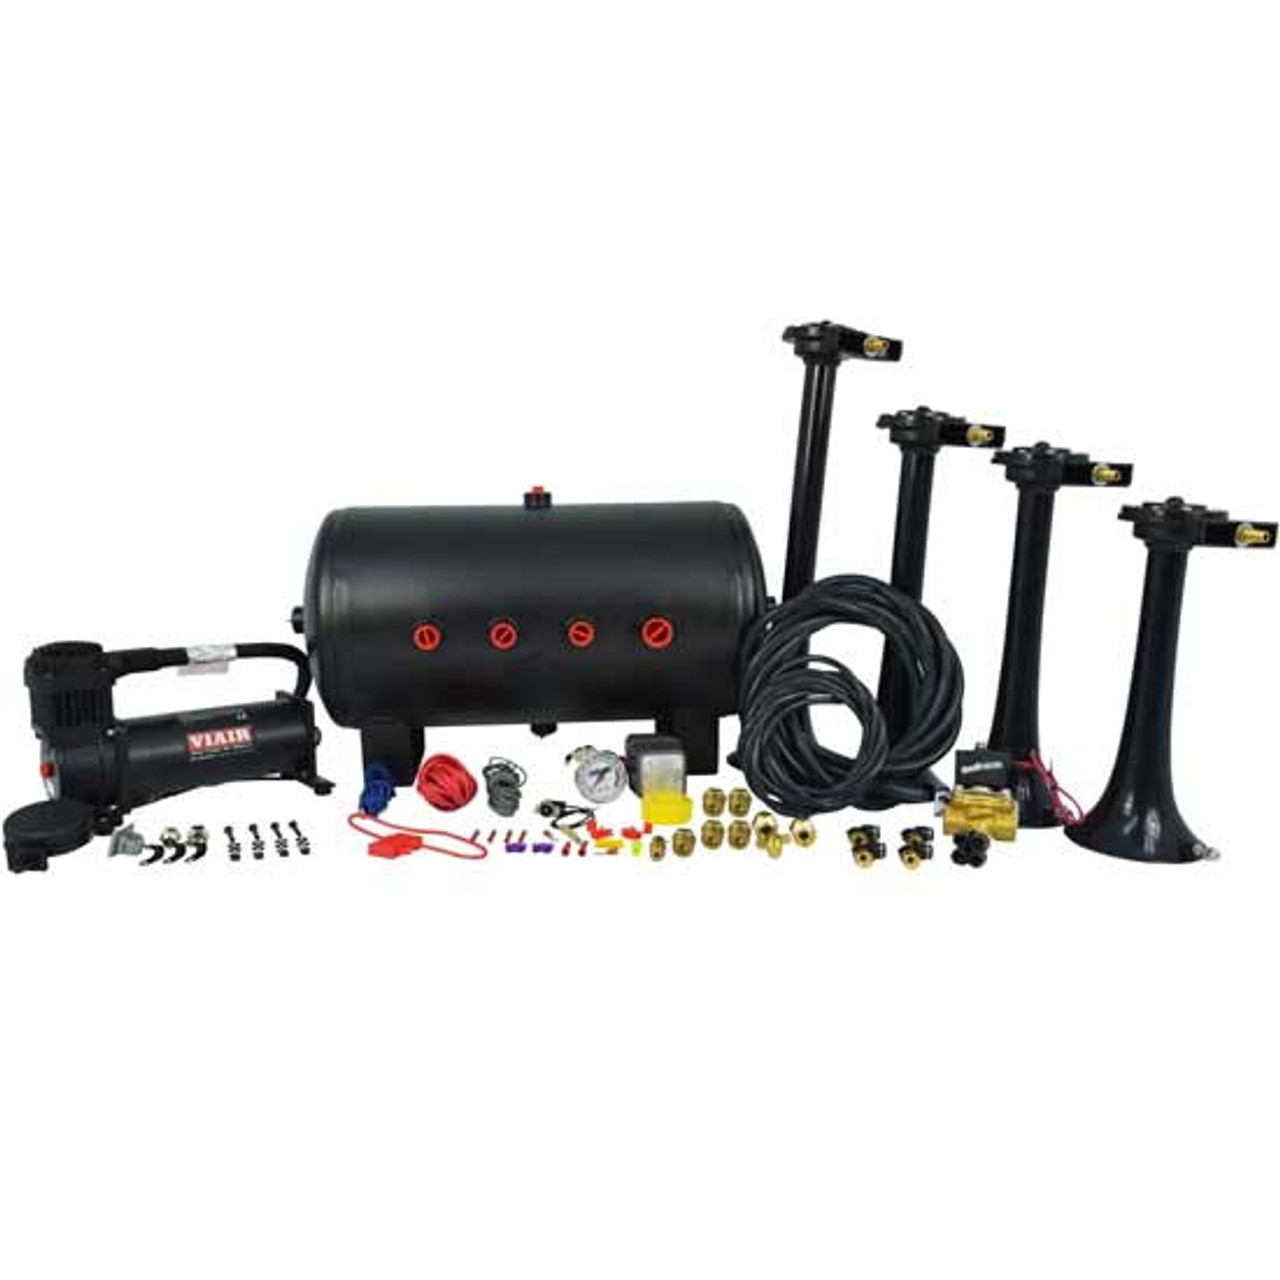 HornBlasters Conductors Special 544 Nightmare Edition Train Horn Kit With 5  Gallon 8 Port 150 PSI Air Tank